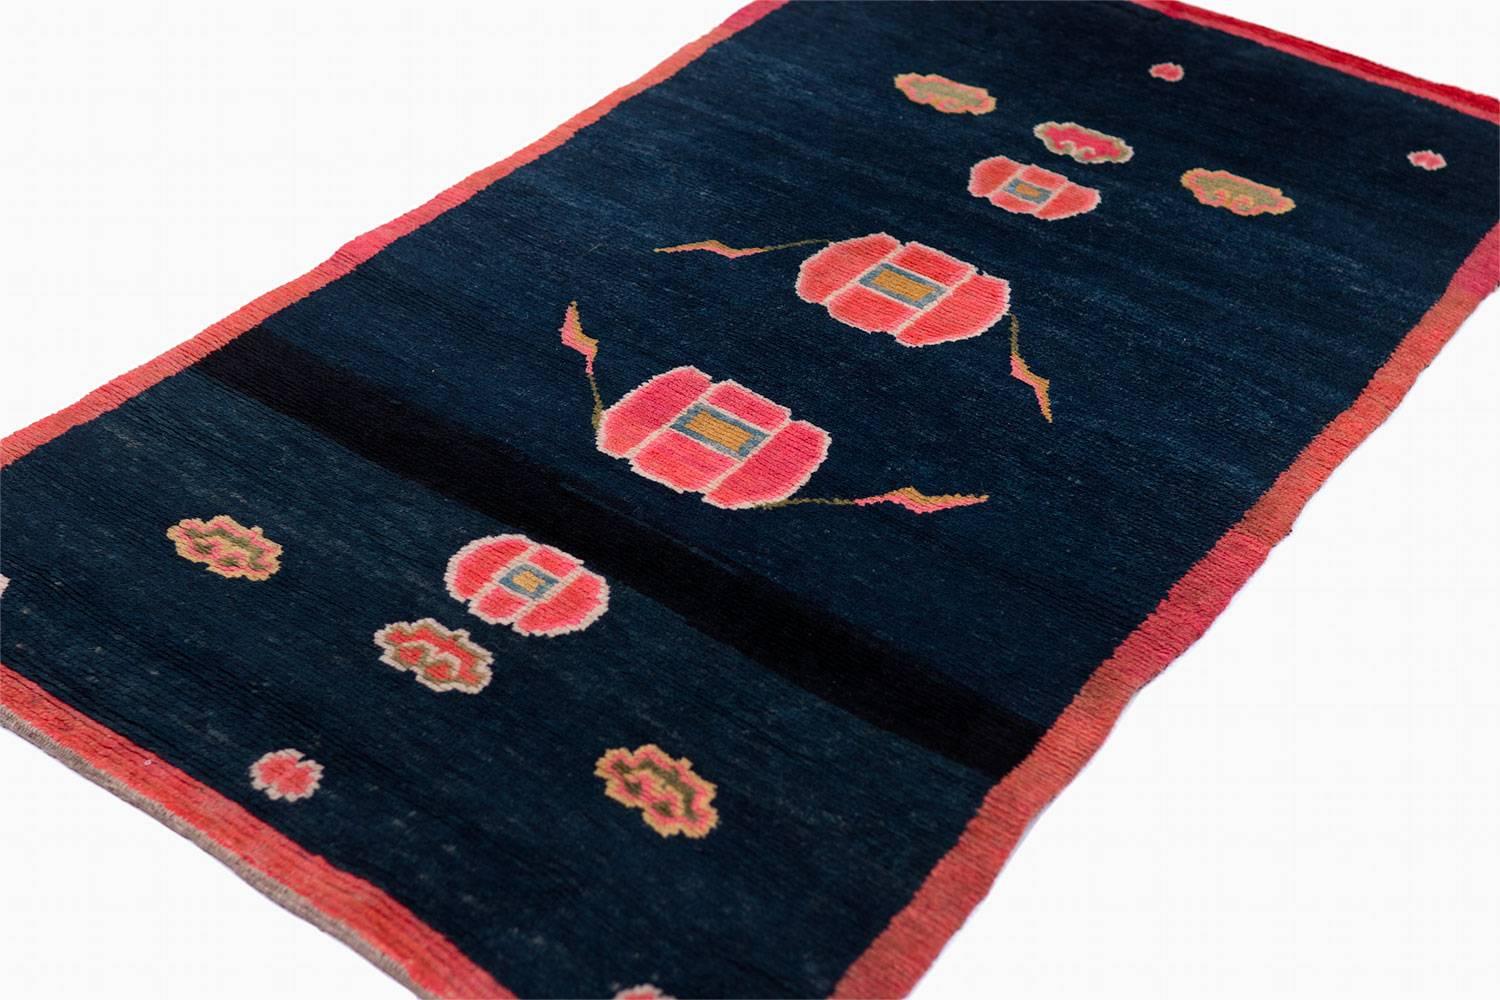 Silky lamb's wool and great indigo blue color characterize this unusually sparse and modern looking antique rug. The clouds and floral elements are unusual in their arrangement. The materials used in this small handwoven rug are superb.